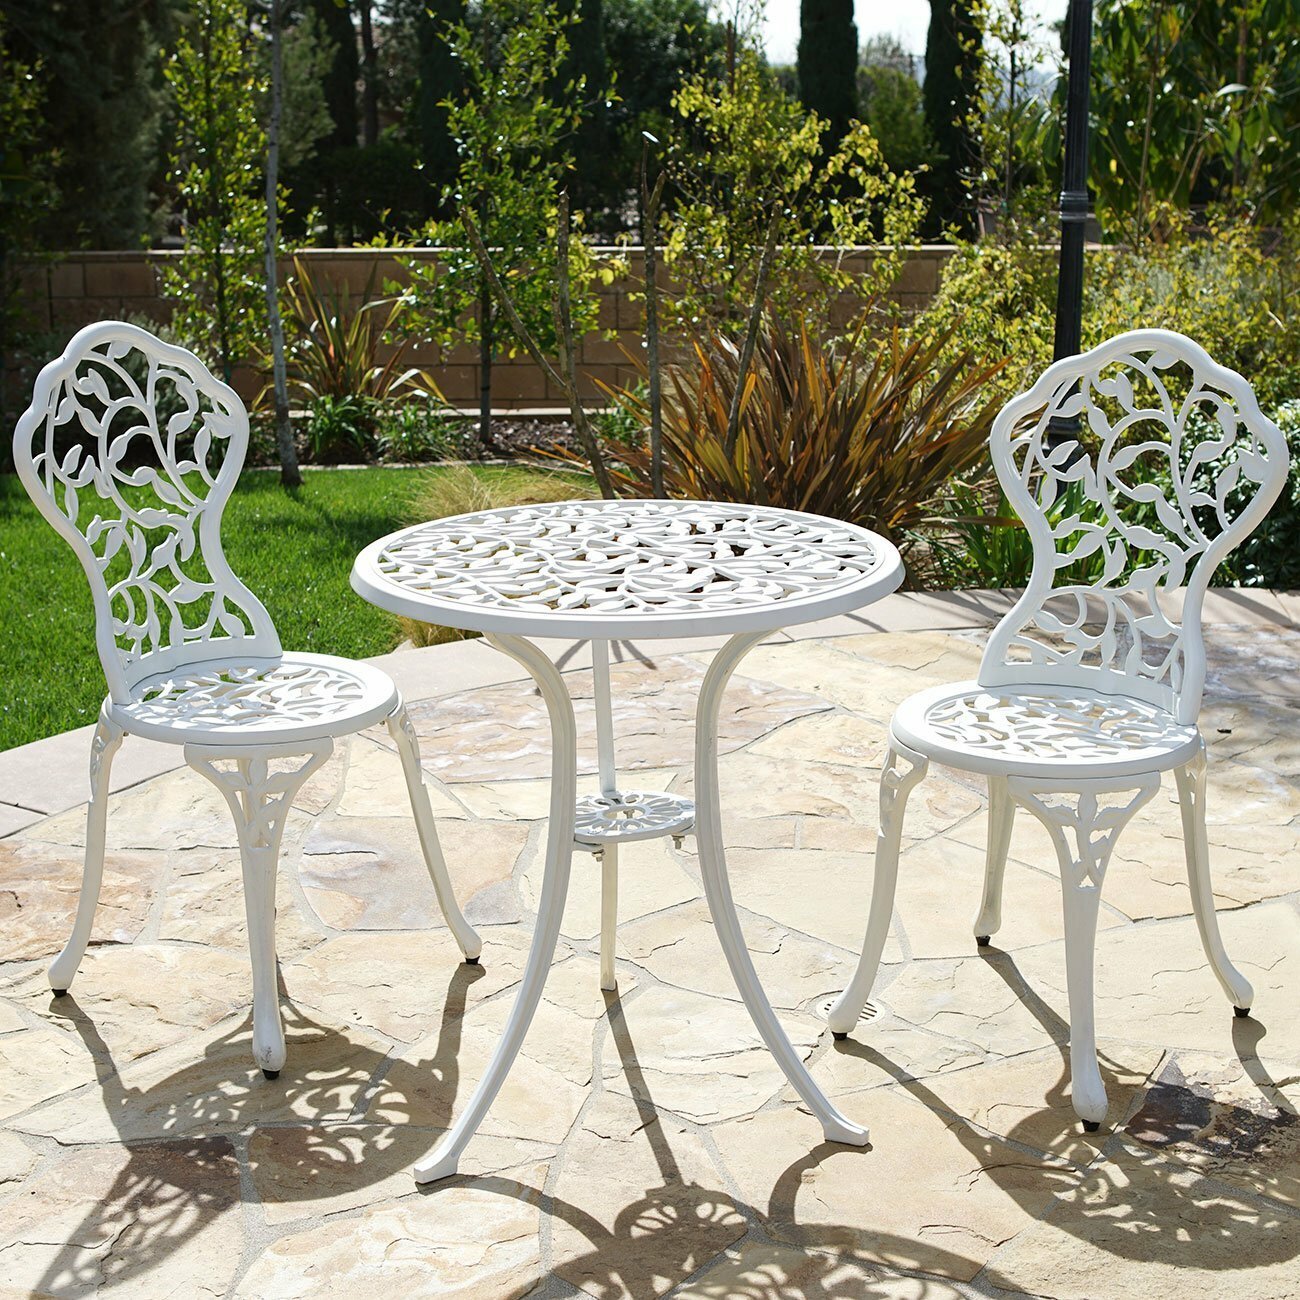 Aluminum Round Pub Table and Chairs